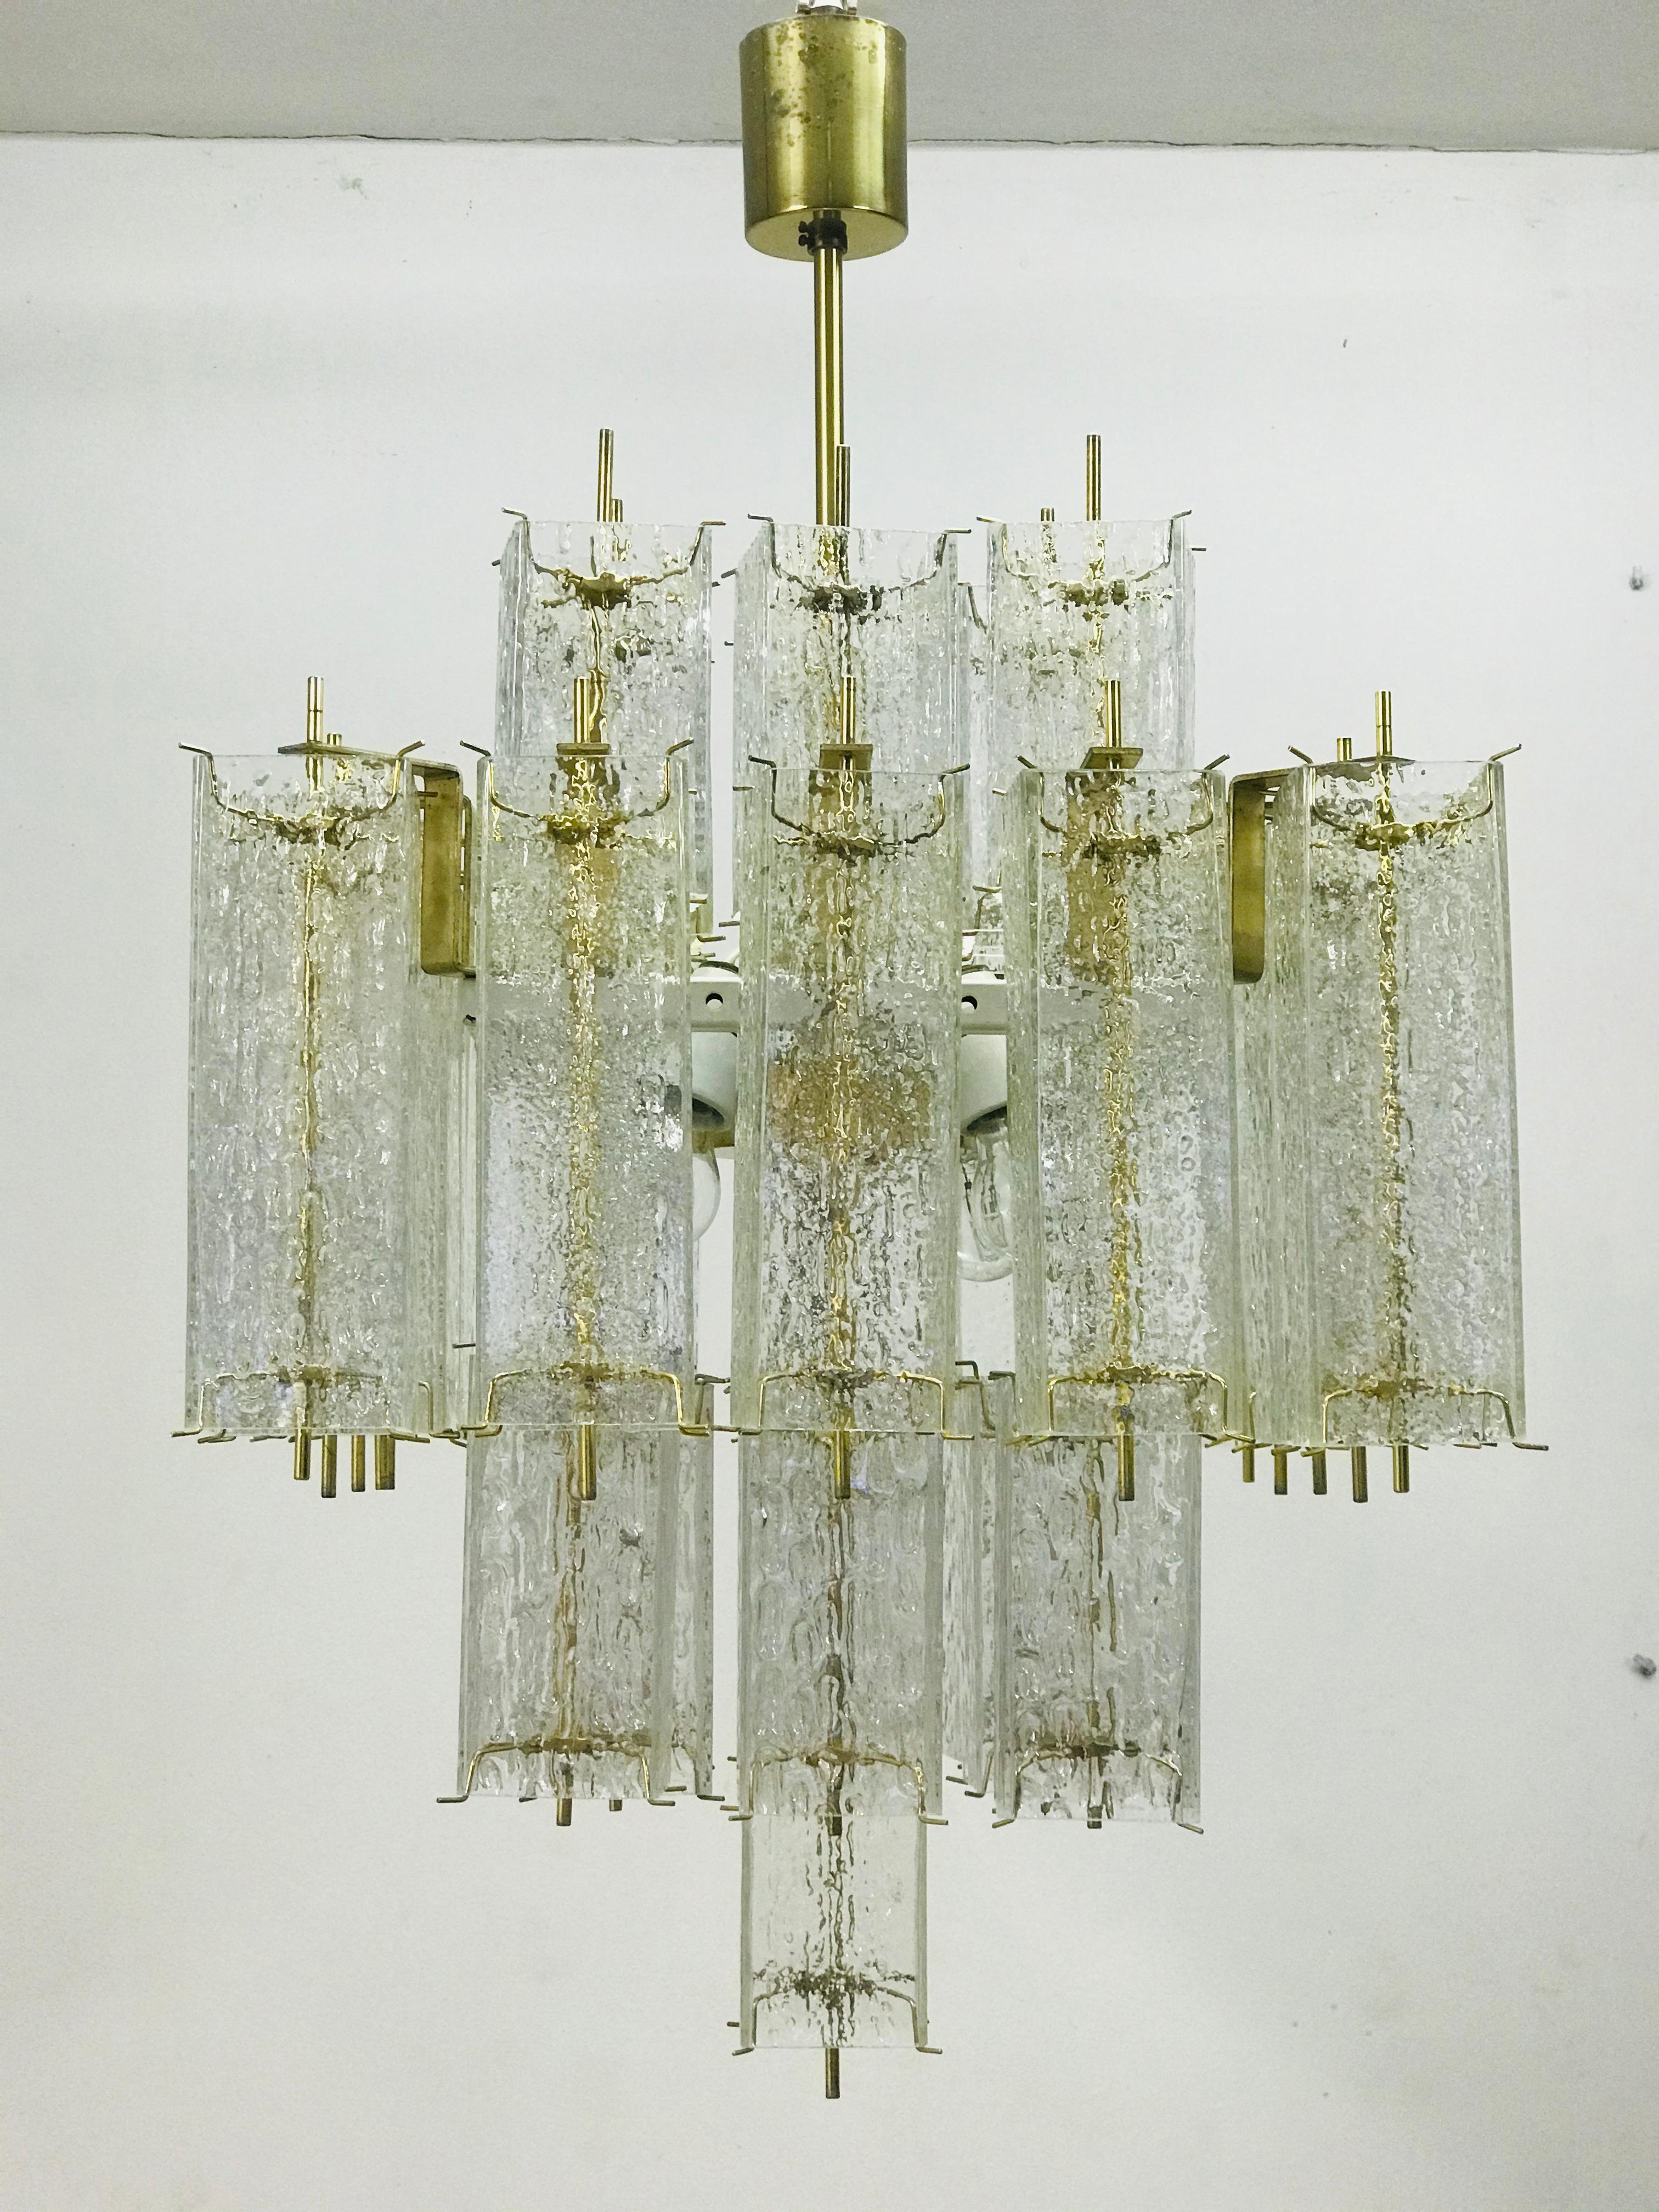 Chandelier is consisted of glass cubes (4 pieces of spare glass) and metal construction with brass fasteners. The chandelier makes a timeless body of modern times.